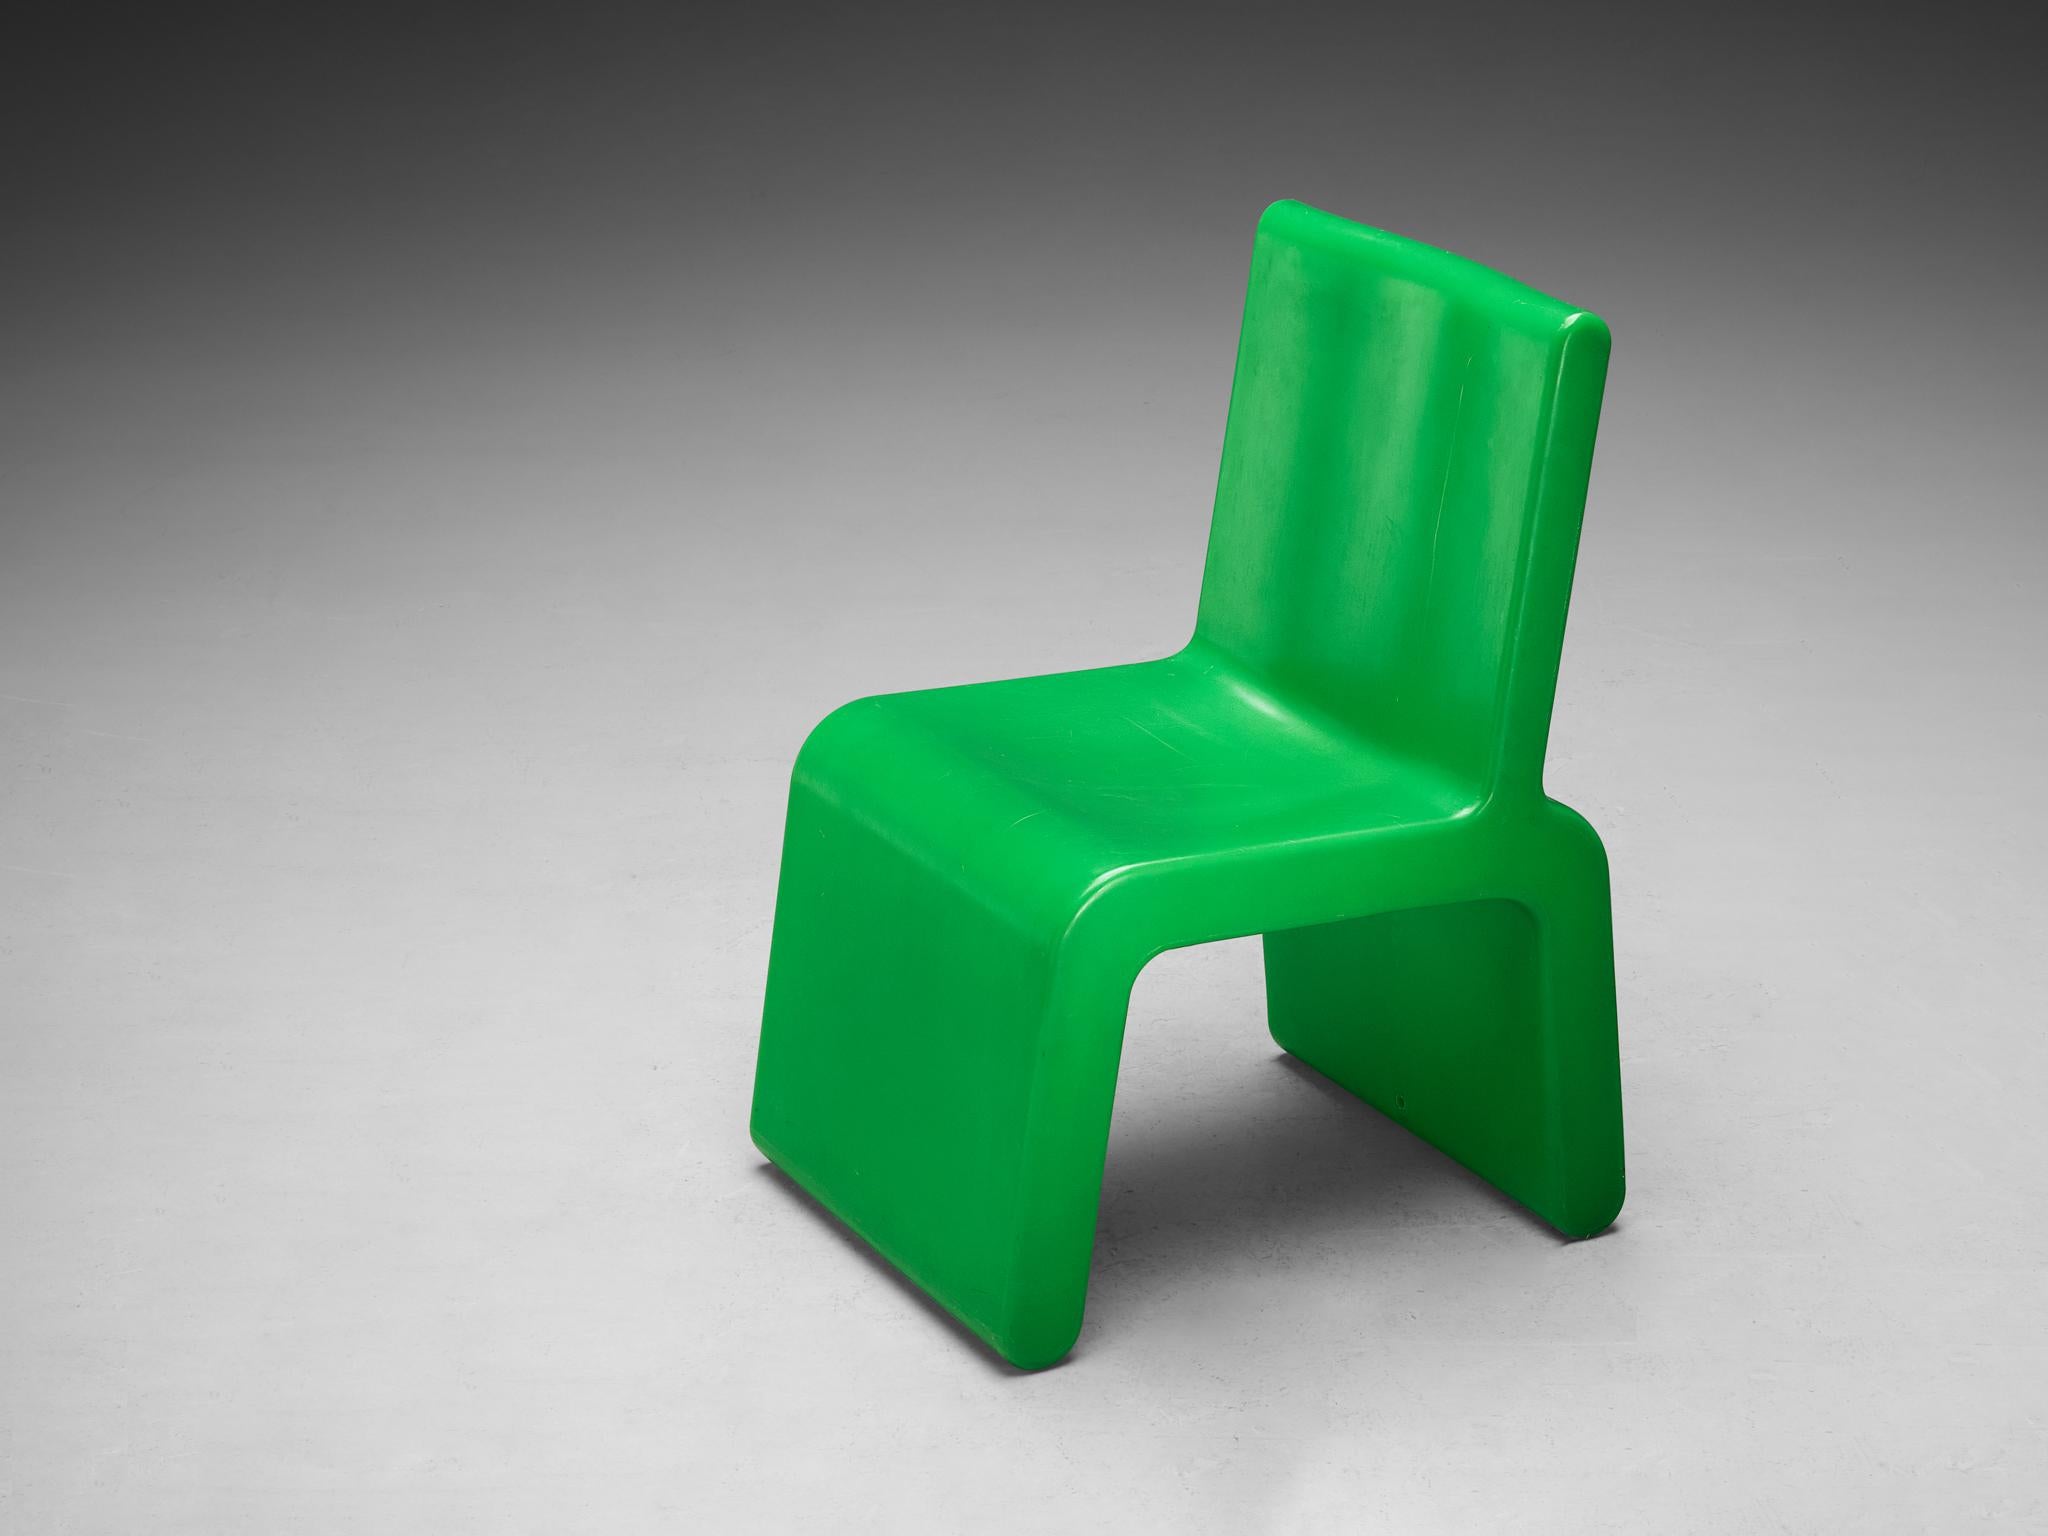 Marc Newson for W & LT (Wild & Lethal Trash) retail stores, chair, part of the 'Kiss the Future' series, rotation molded polypropylene, Australia / Belgium, 1996-1997 

Marc Newson (1963-), is an Australian-American designer recognized as one of the